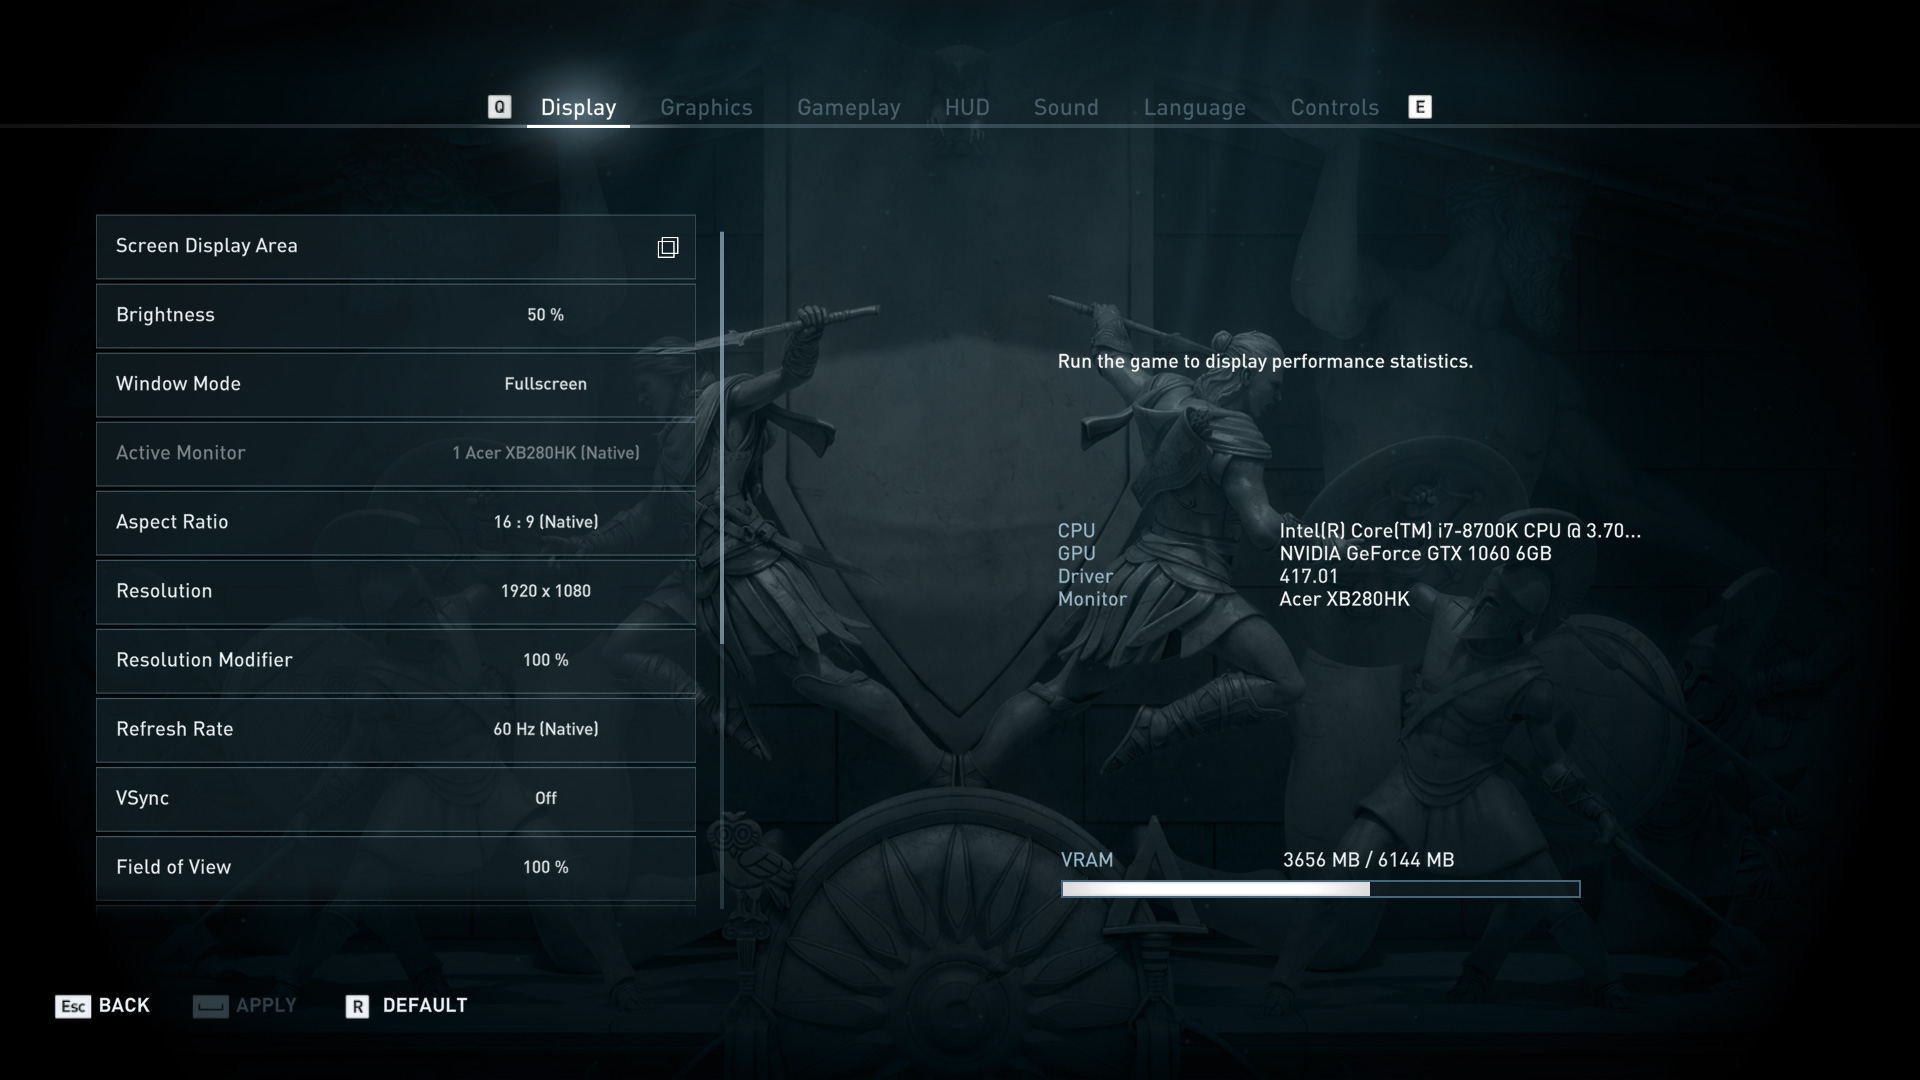 Assassin's Creed Odyssey PC requirements: what specs need for 60 fps